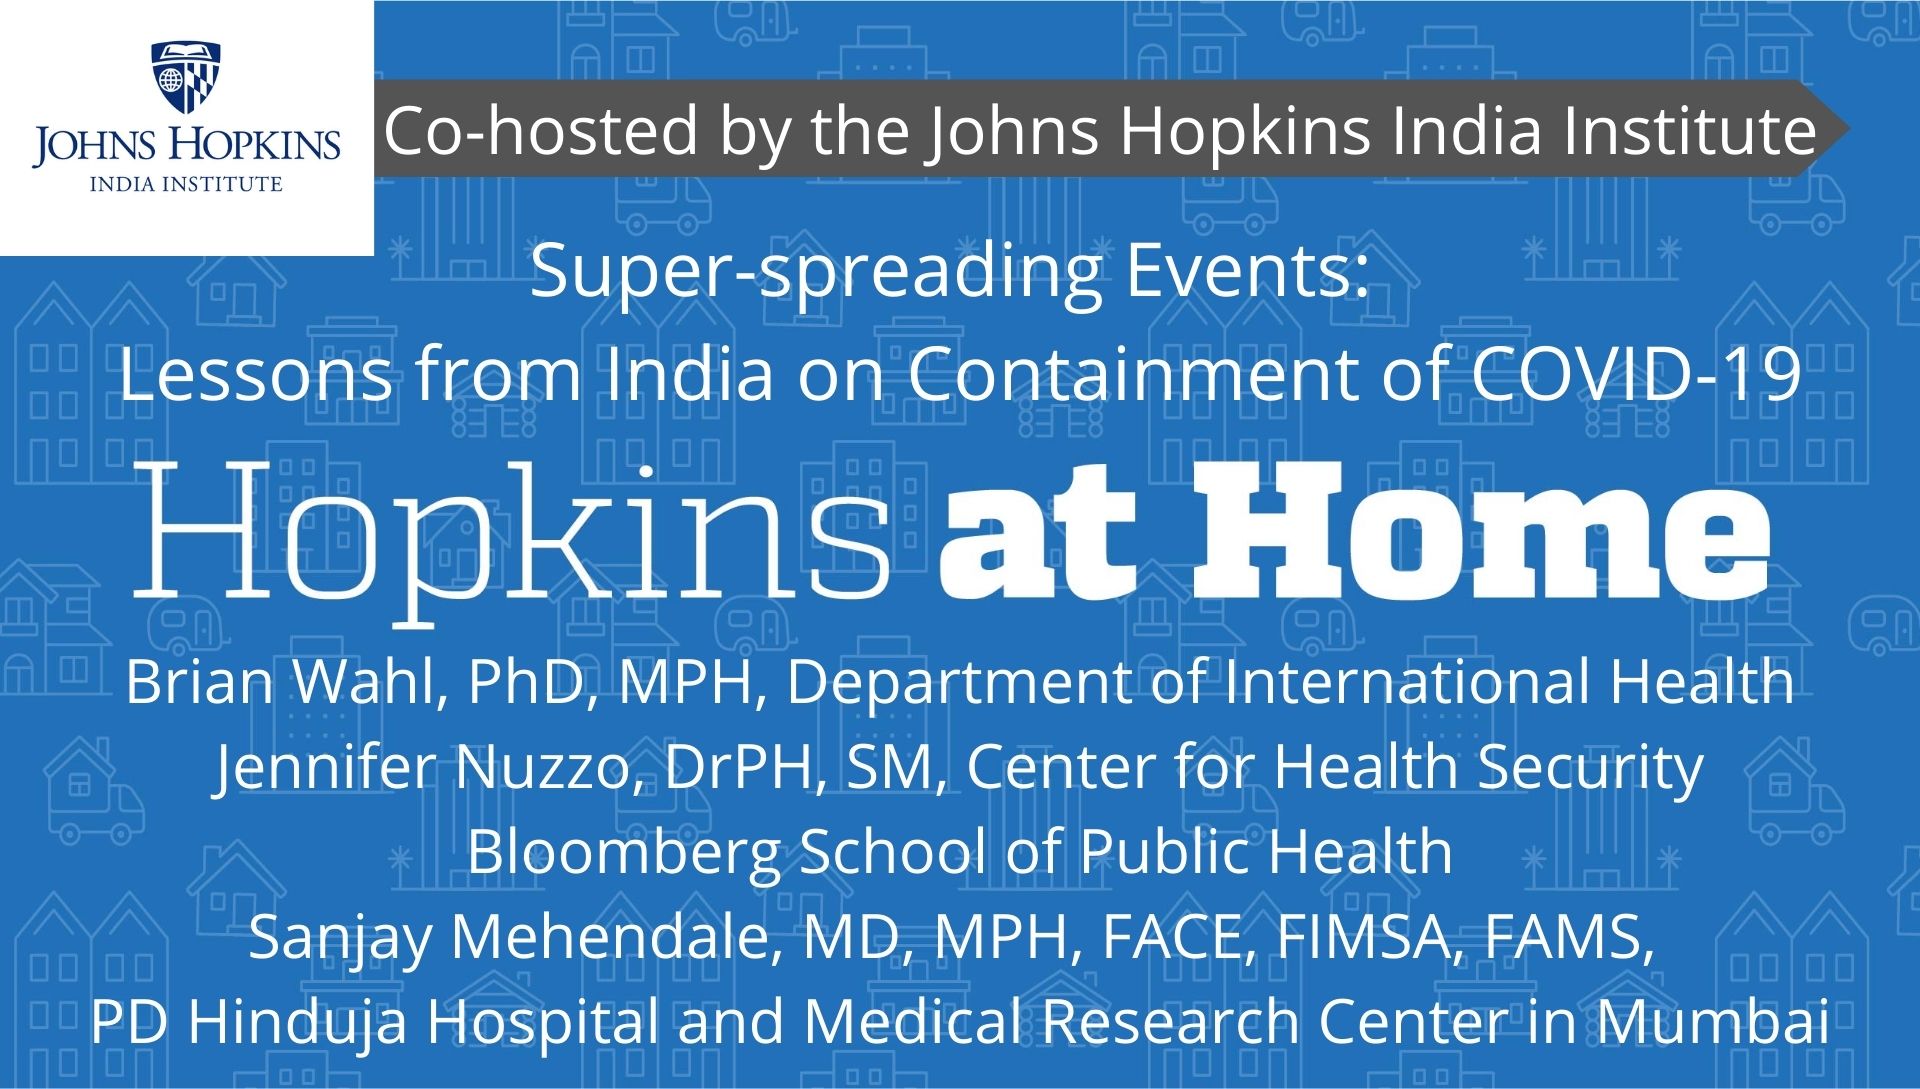 Super-spreading Events: Lessons from India on Containment of COVID-19, Co-Hosted by Johns Hopkins India Institute